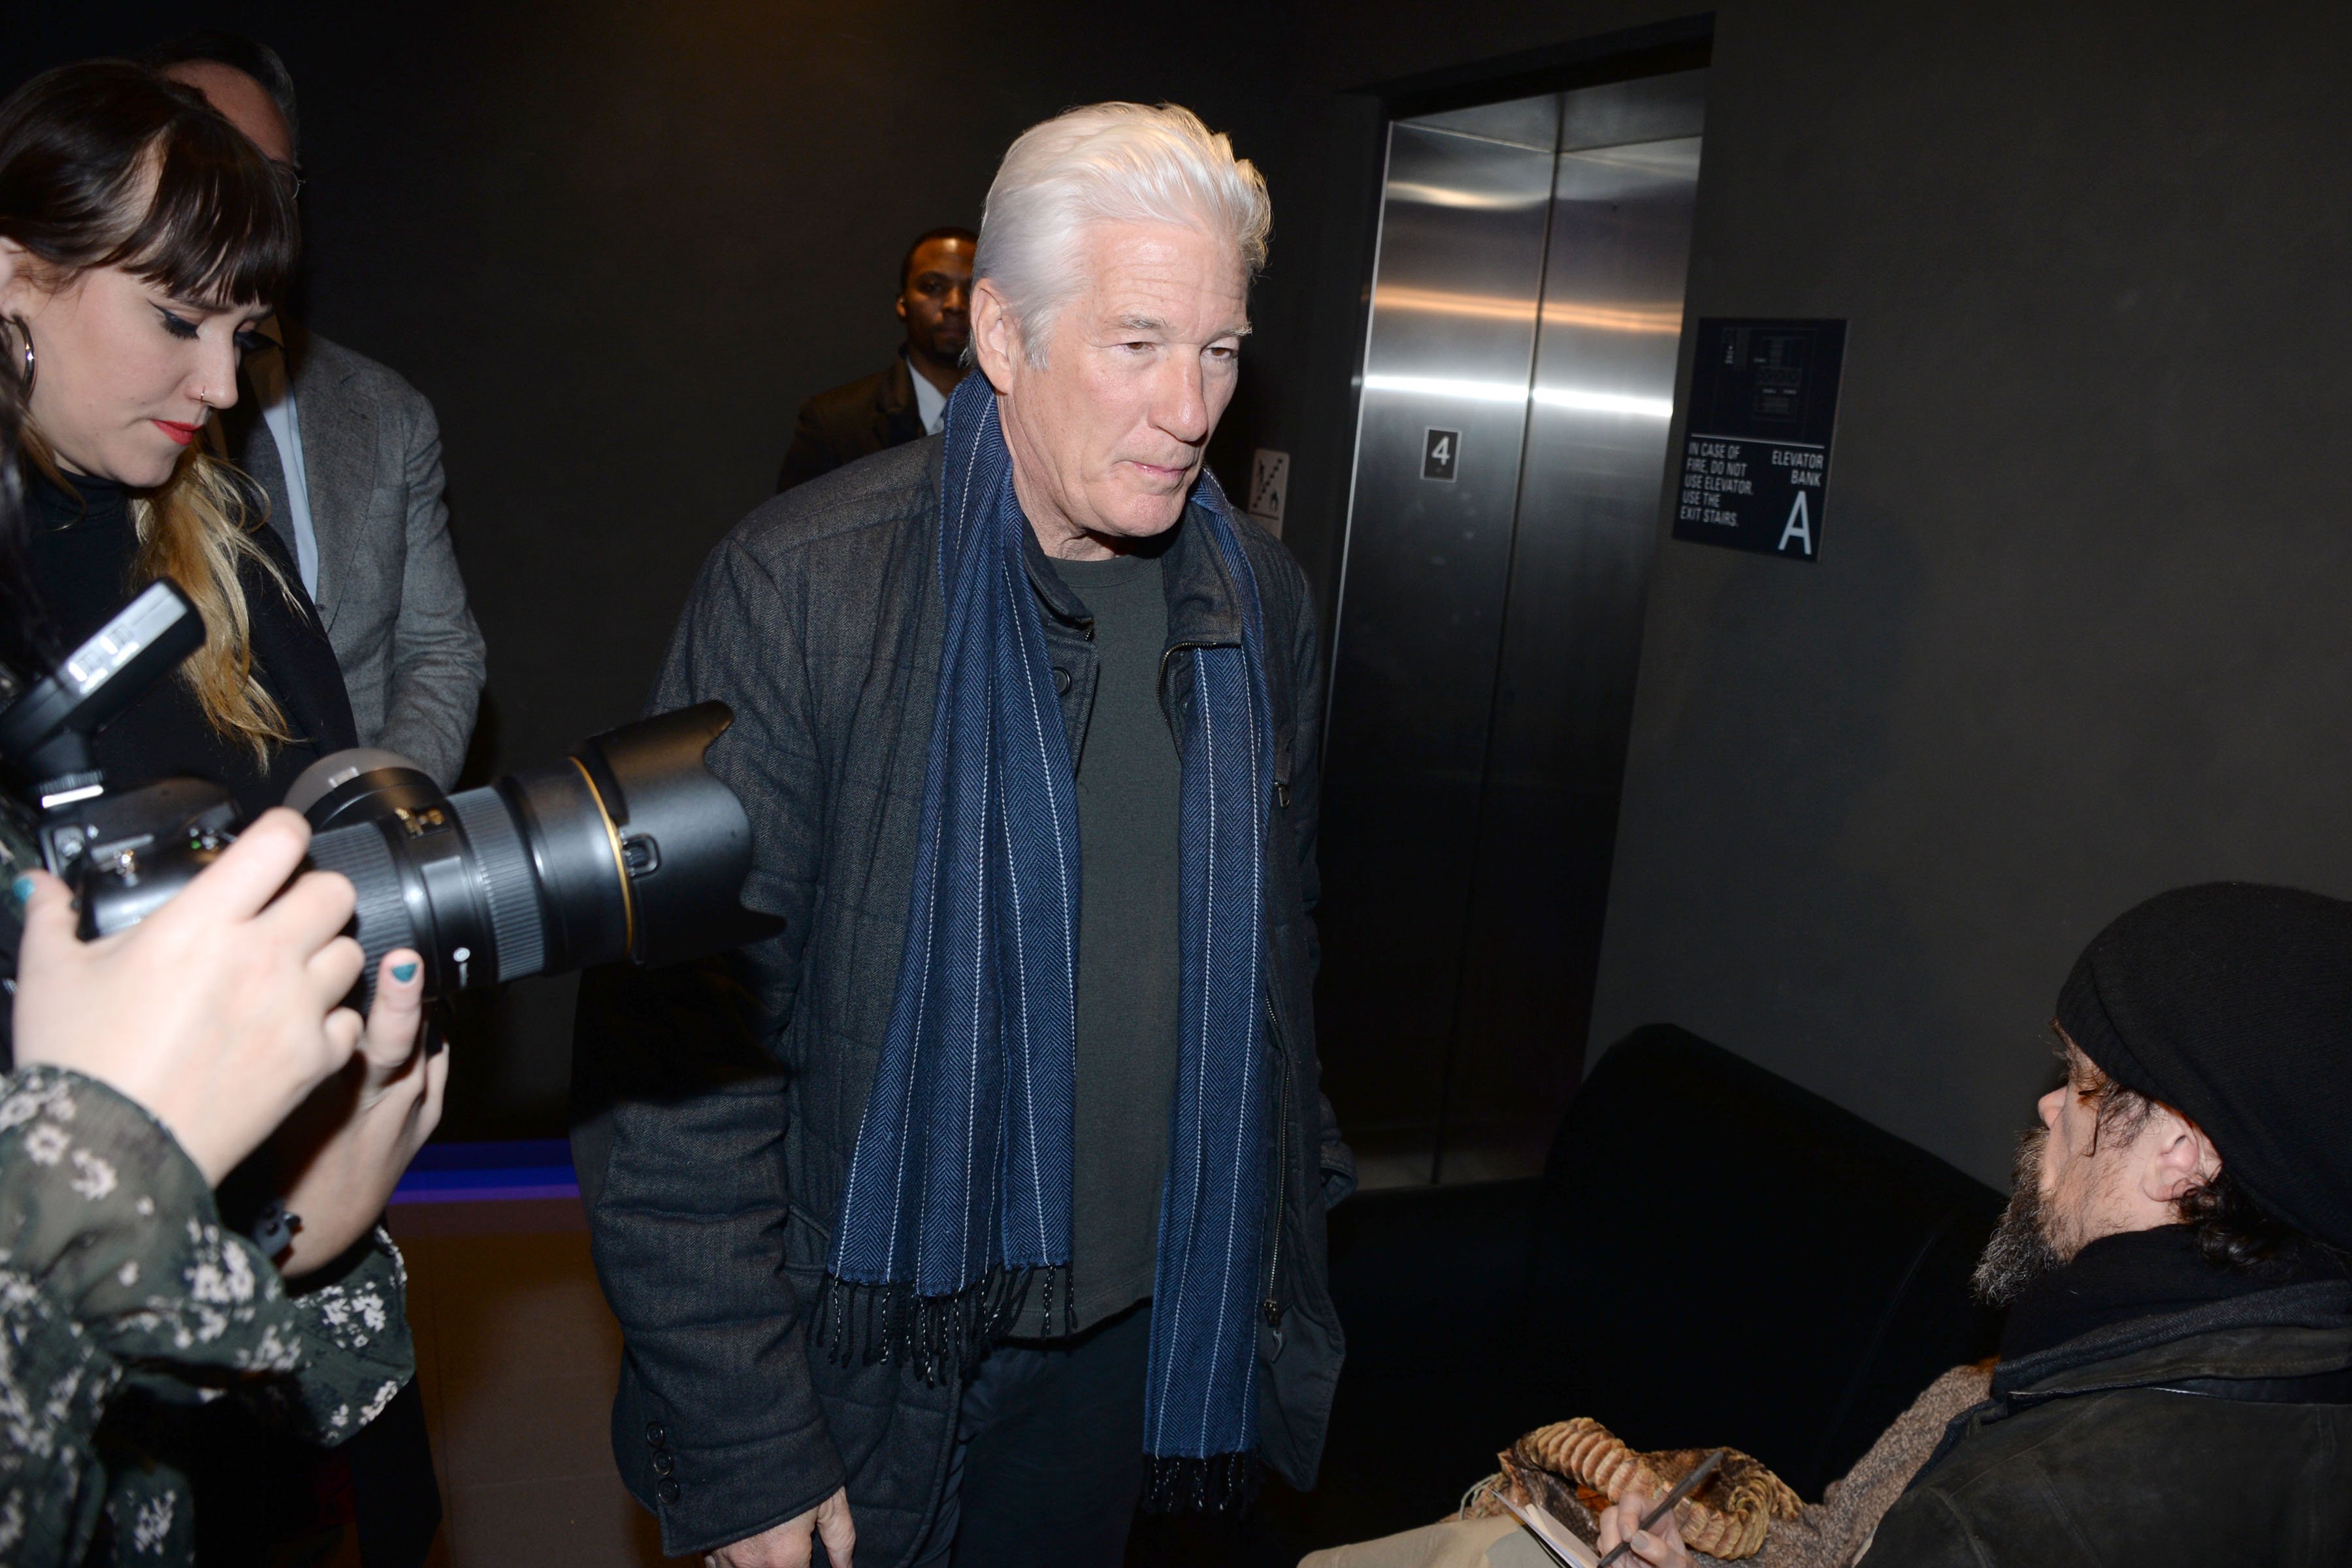 Richard Gere during IFC Films screening of "Three Christs" at Regal Essex Crossing on January 9, 2020 in New York City. / Source: Getty Images